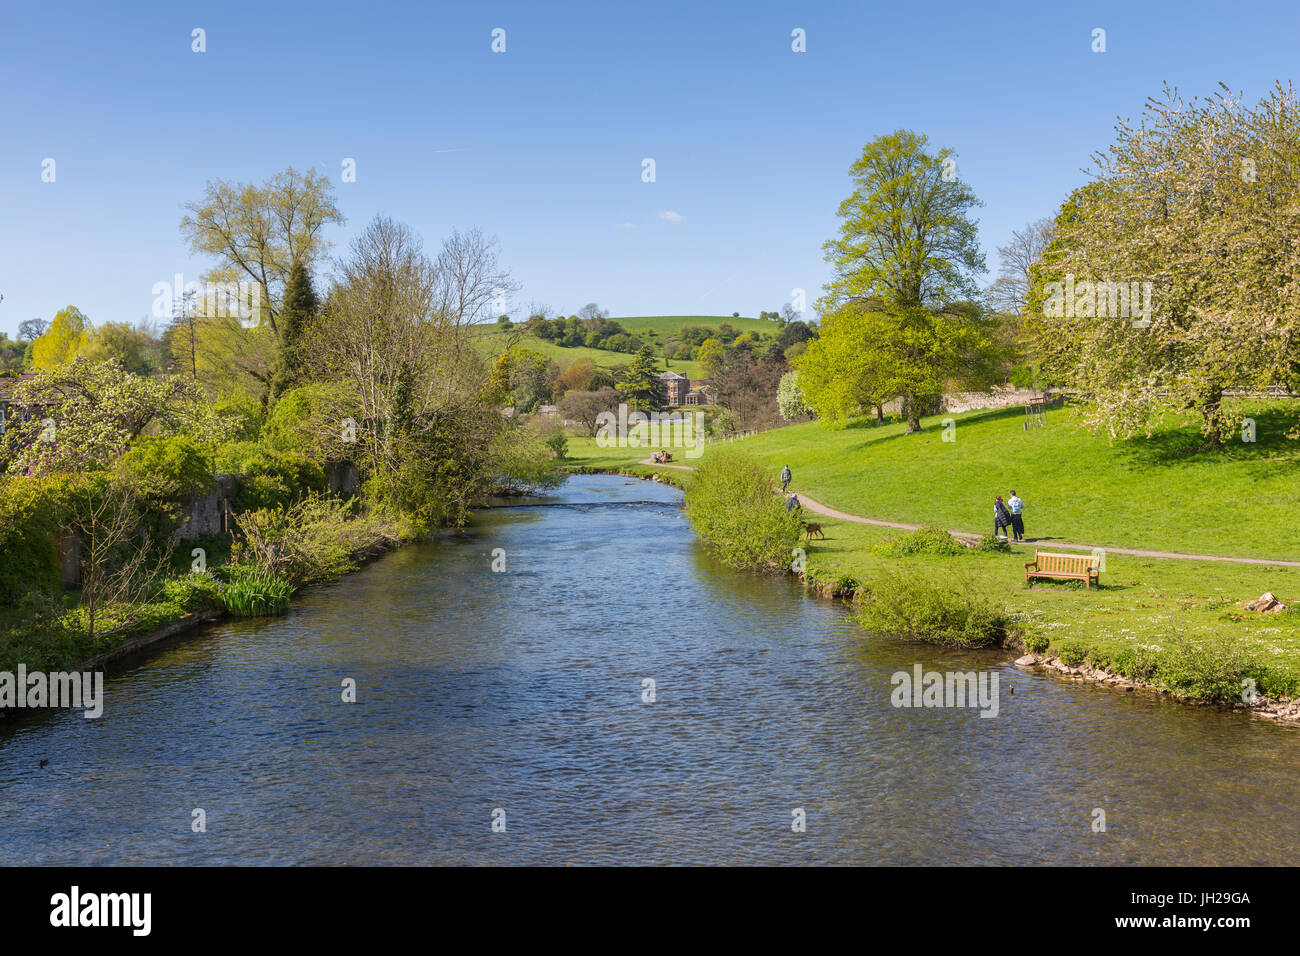 The River Wye in Bakewell in springtime, Derbyshire Dales, Derbyshire, England, United Kingdom, Europe Stock Photo